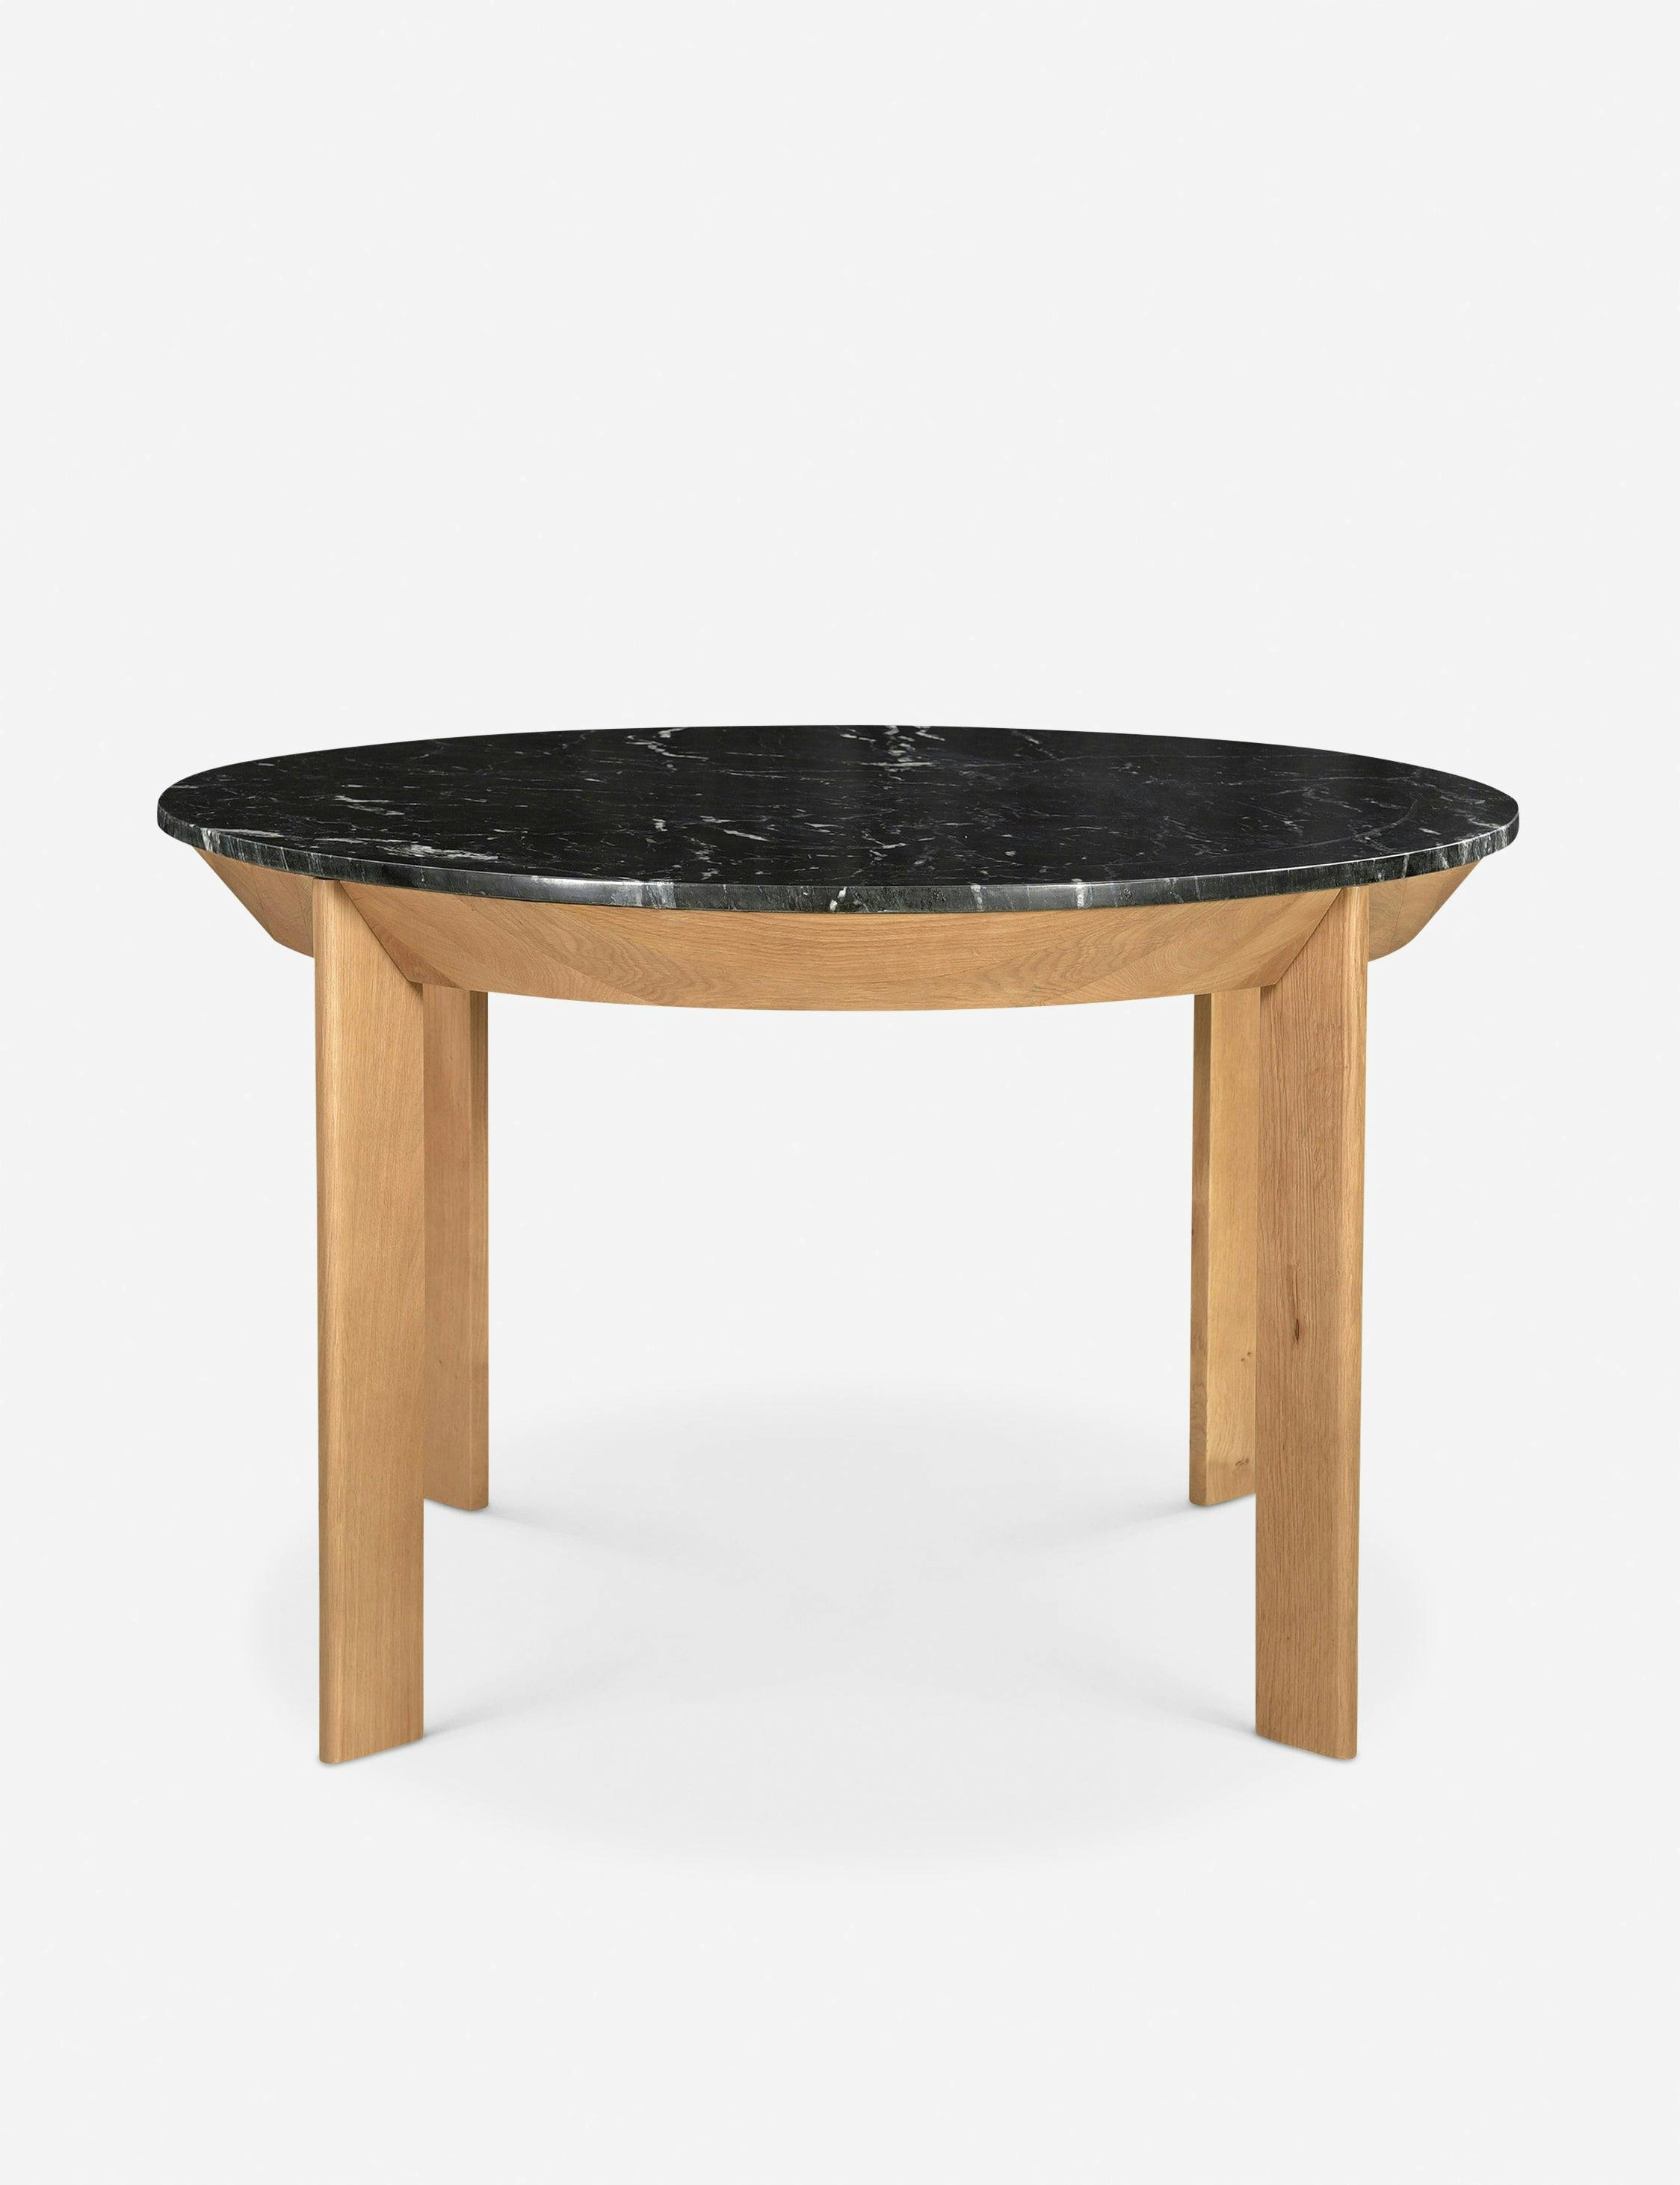 Huitink Round Dining Table - Black Marble